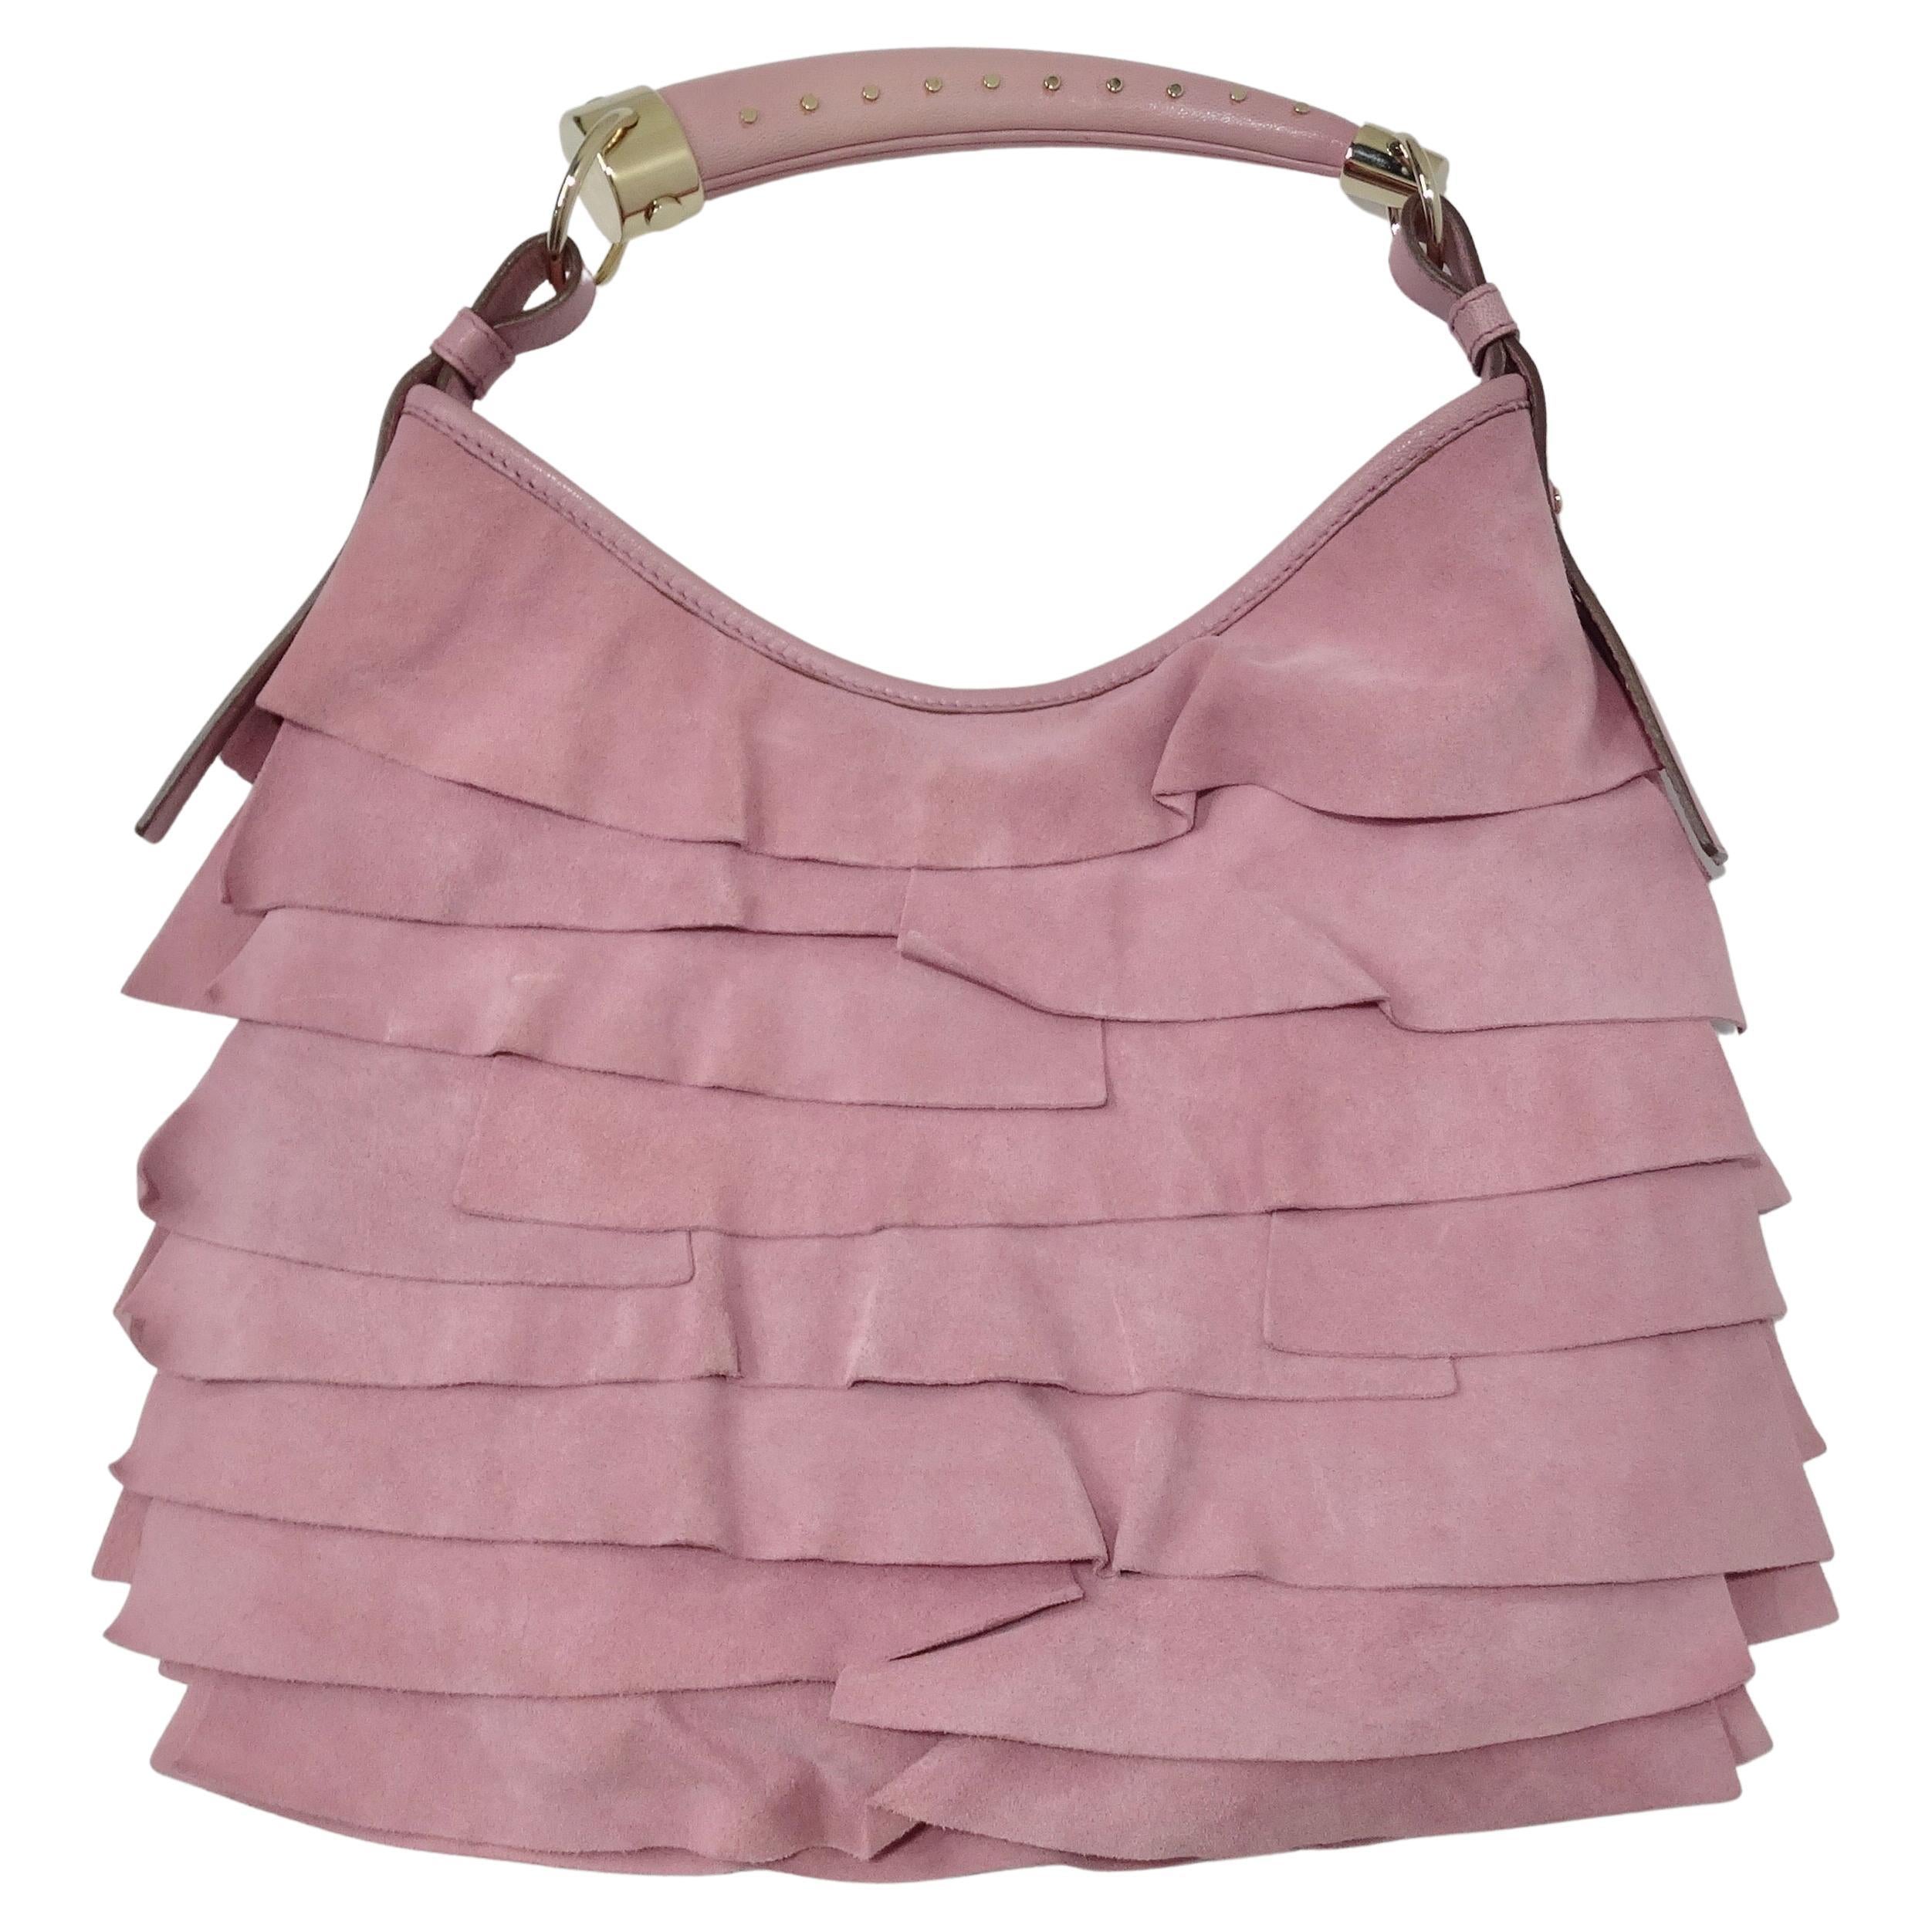 Wow! This vintage Tom Ford for Yves Saint Laurent pink Saint Tropez handbag is such a special find! Yves Saint Laurent presents their iconic Saint Tropez handbag in this super fun light bubble-gum pink shade. Circa early 2000's, this handbag